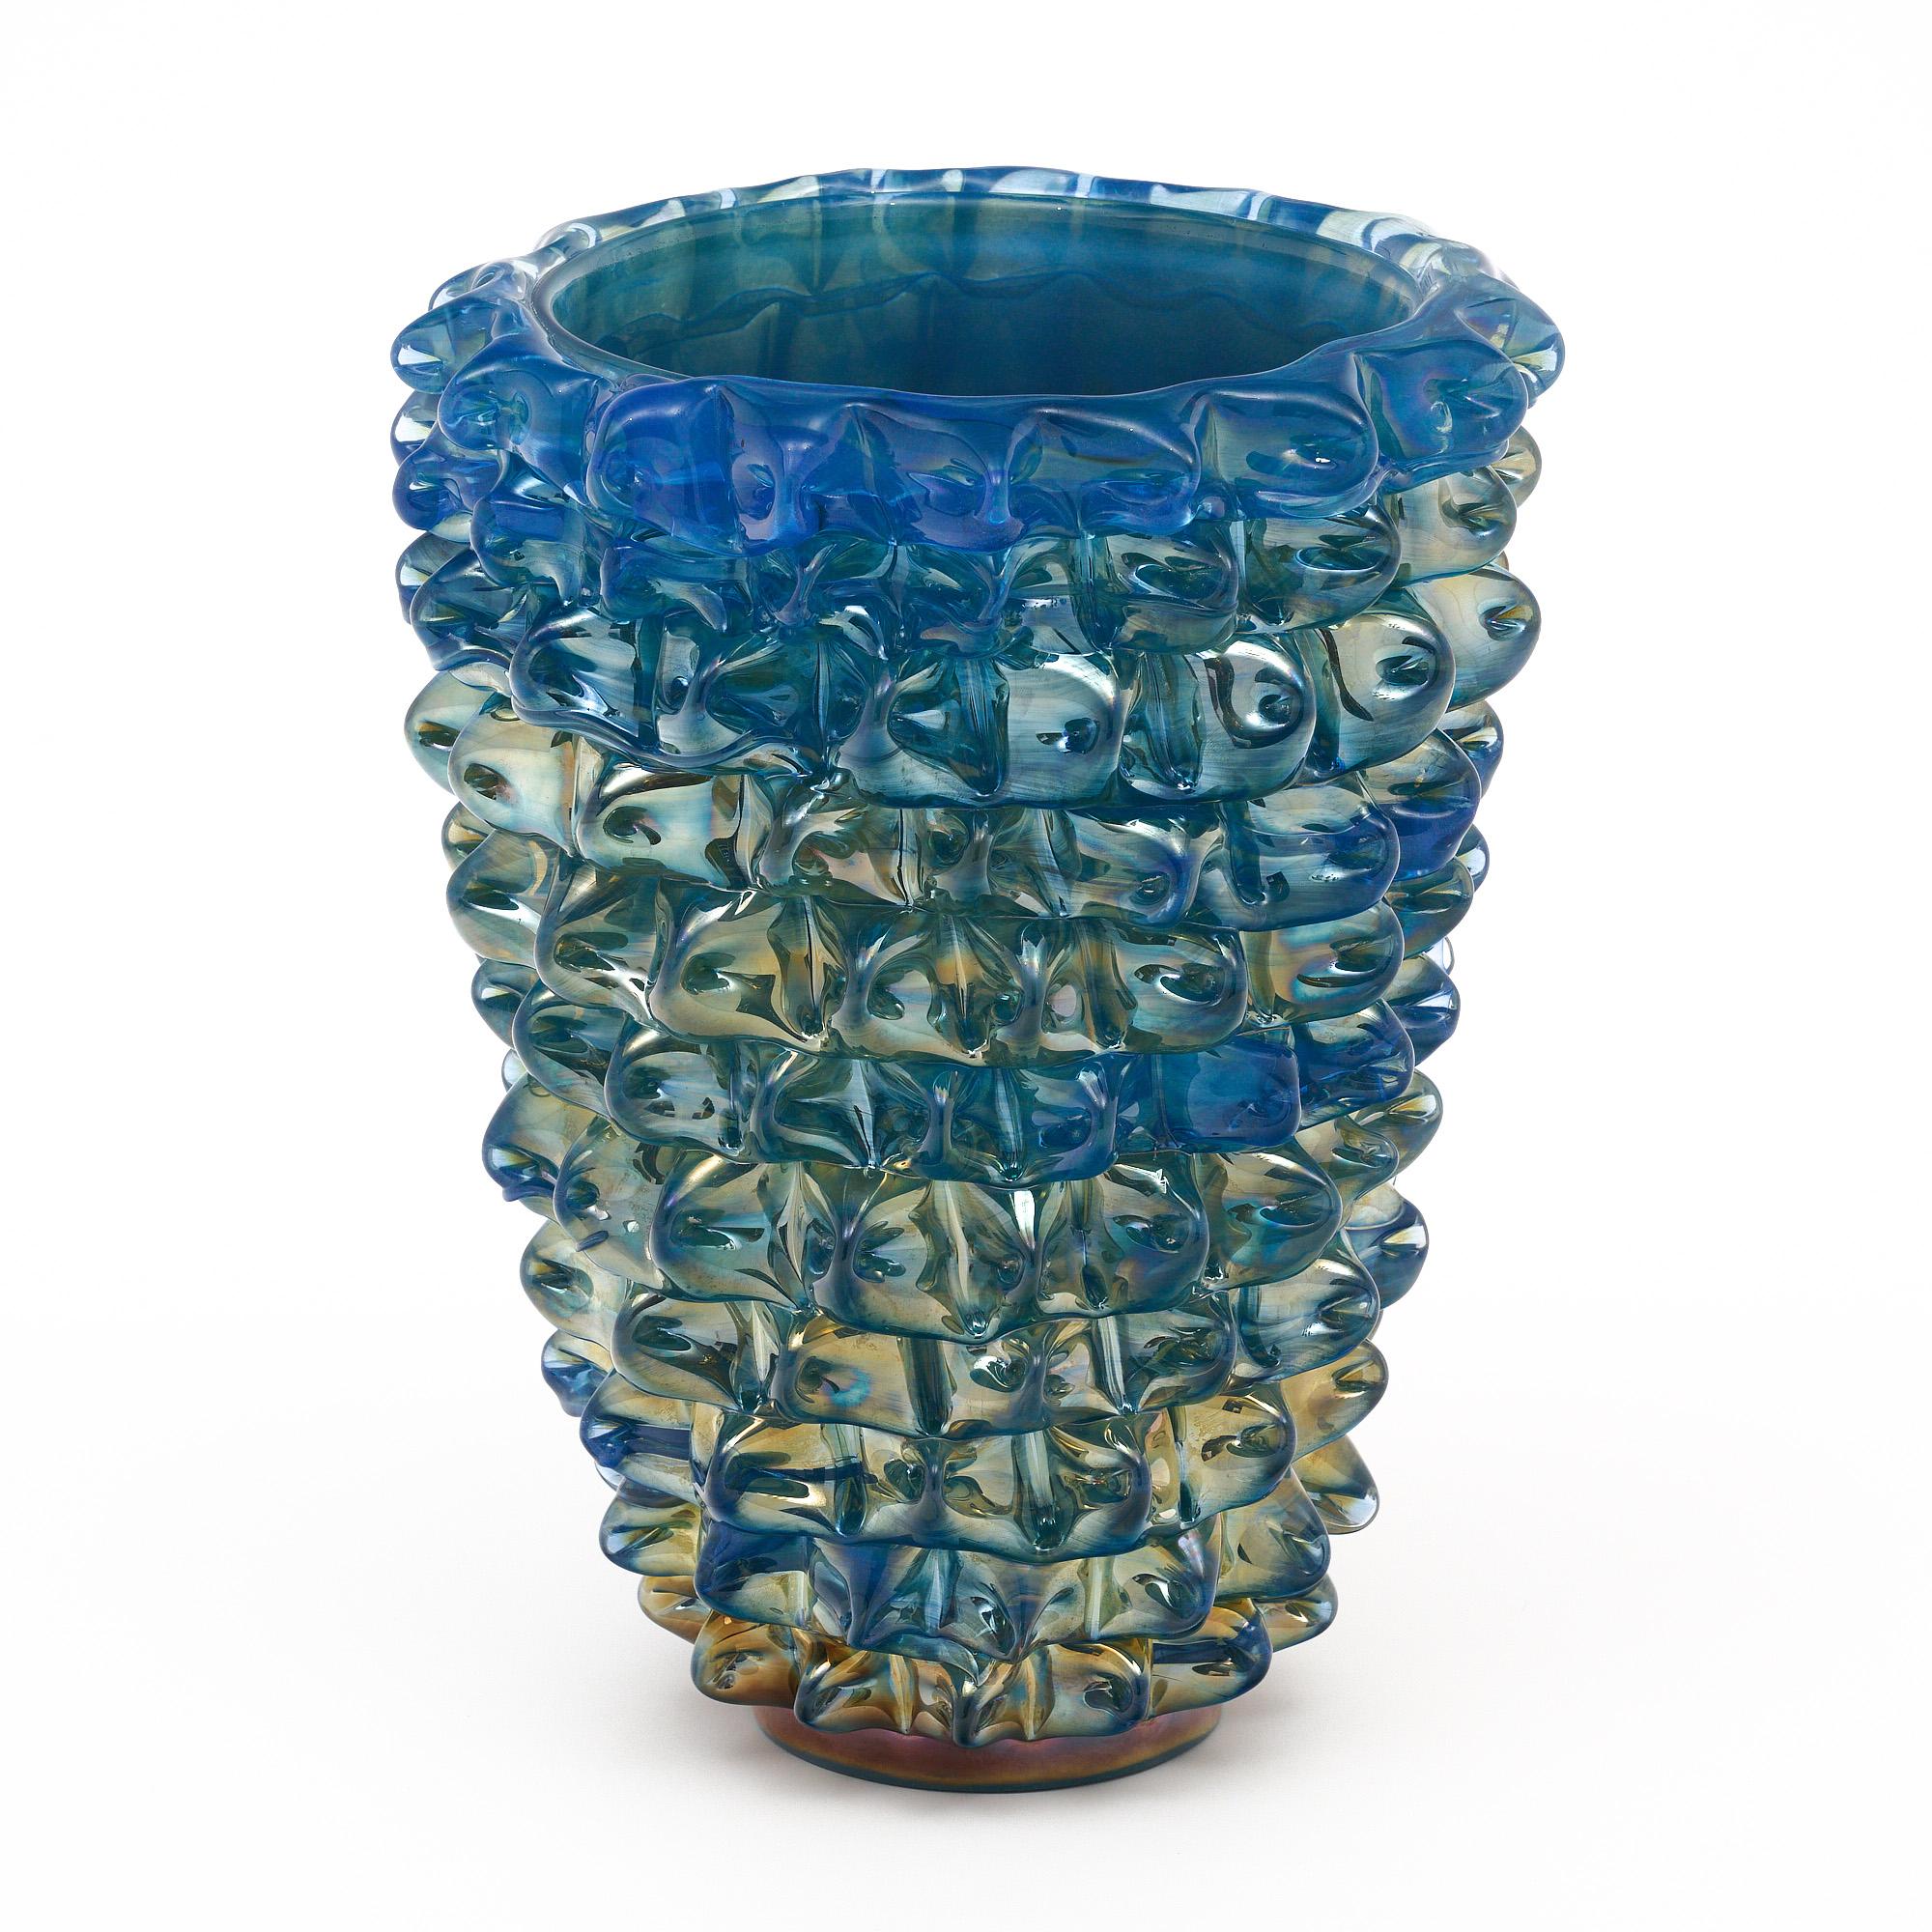 Murano glass vase, Italian, from the island of Murano and crafted in the manner of Barovier. This hand-blown piece has a is made using the incamiciato technique where several layers of varying colors are used to create a unique color and depth. It